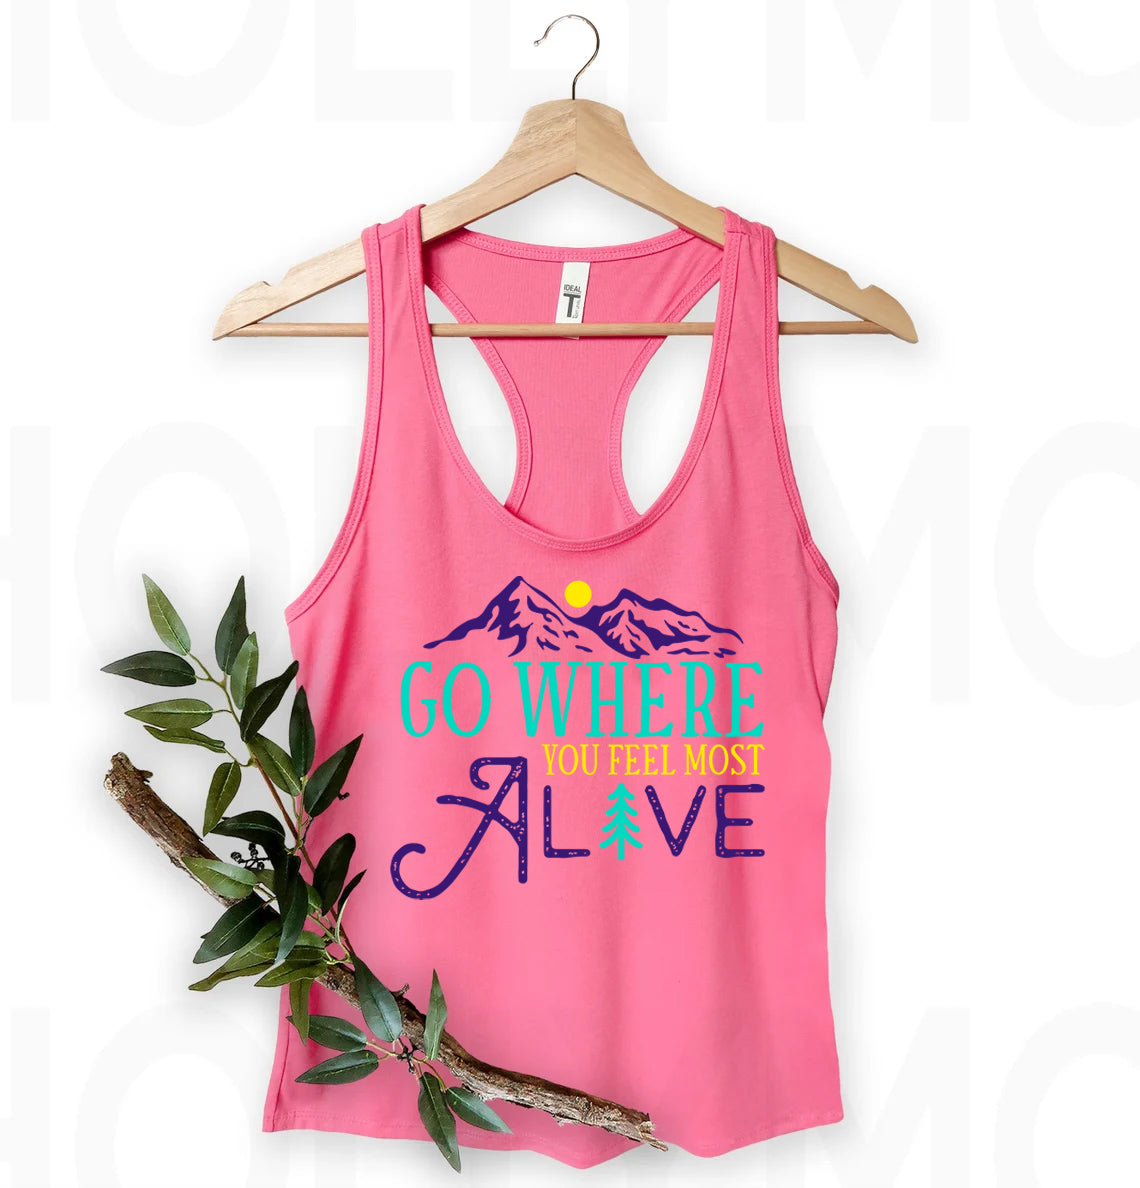 Go Where You Feel Most Alive Graphic Tee